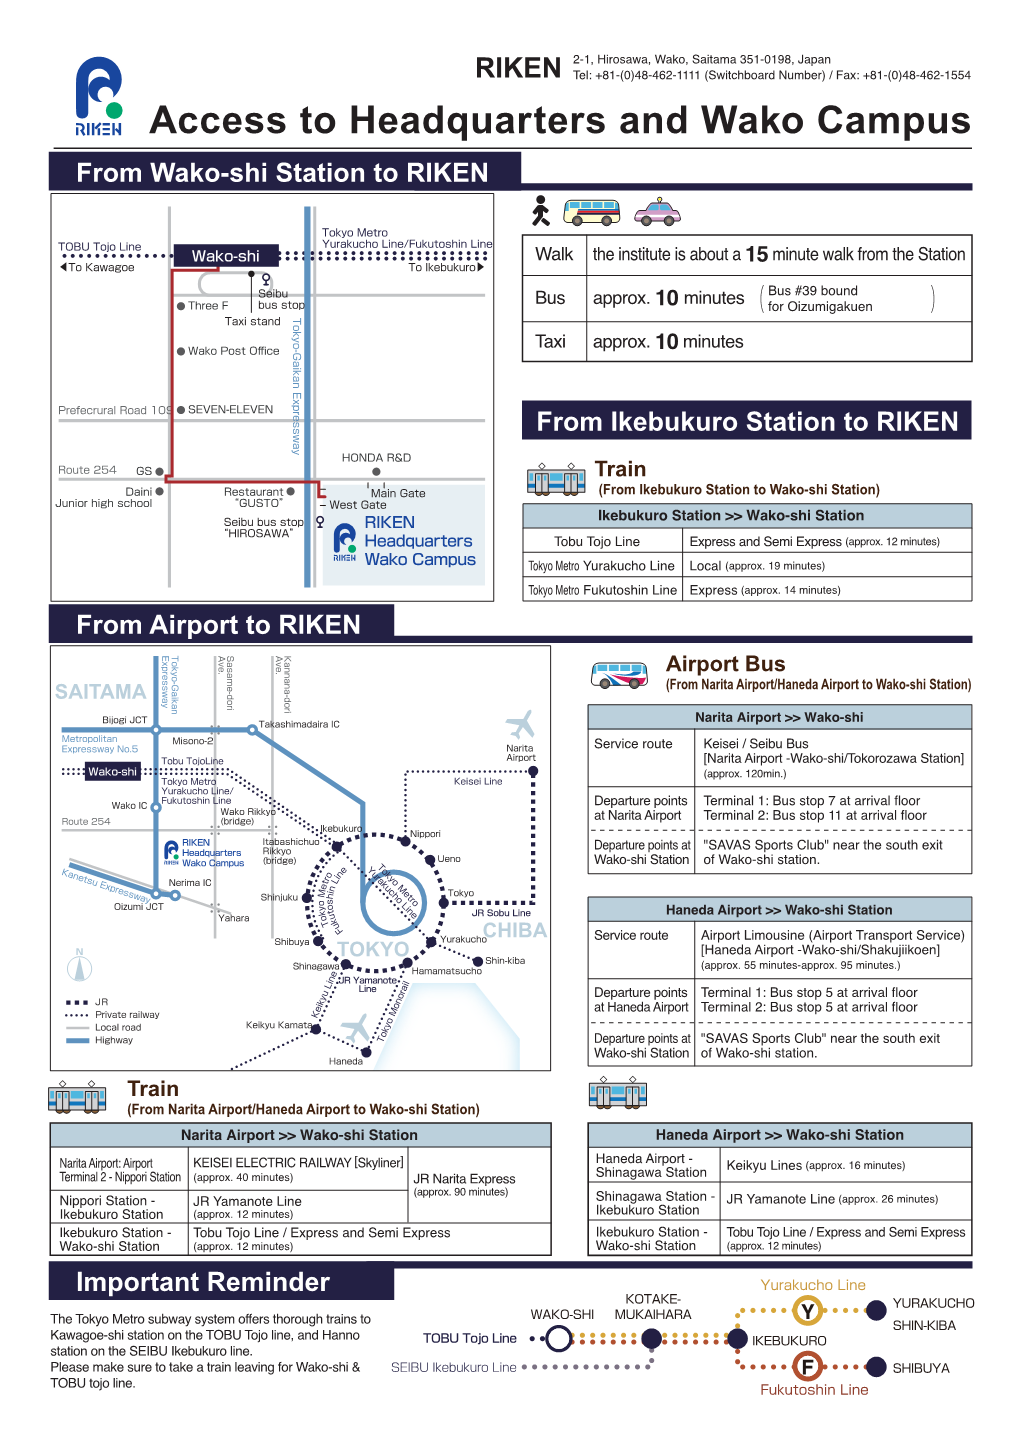 Access to Headquarters and Wako Campus from Wako-Shi Station to RIKEN